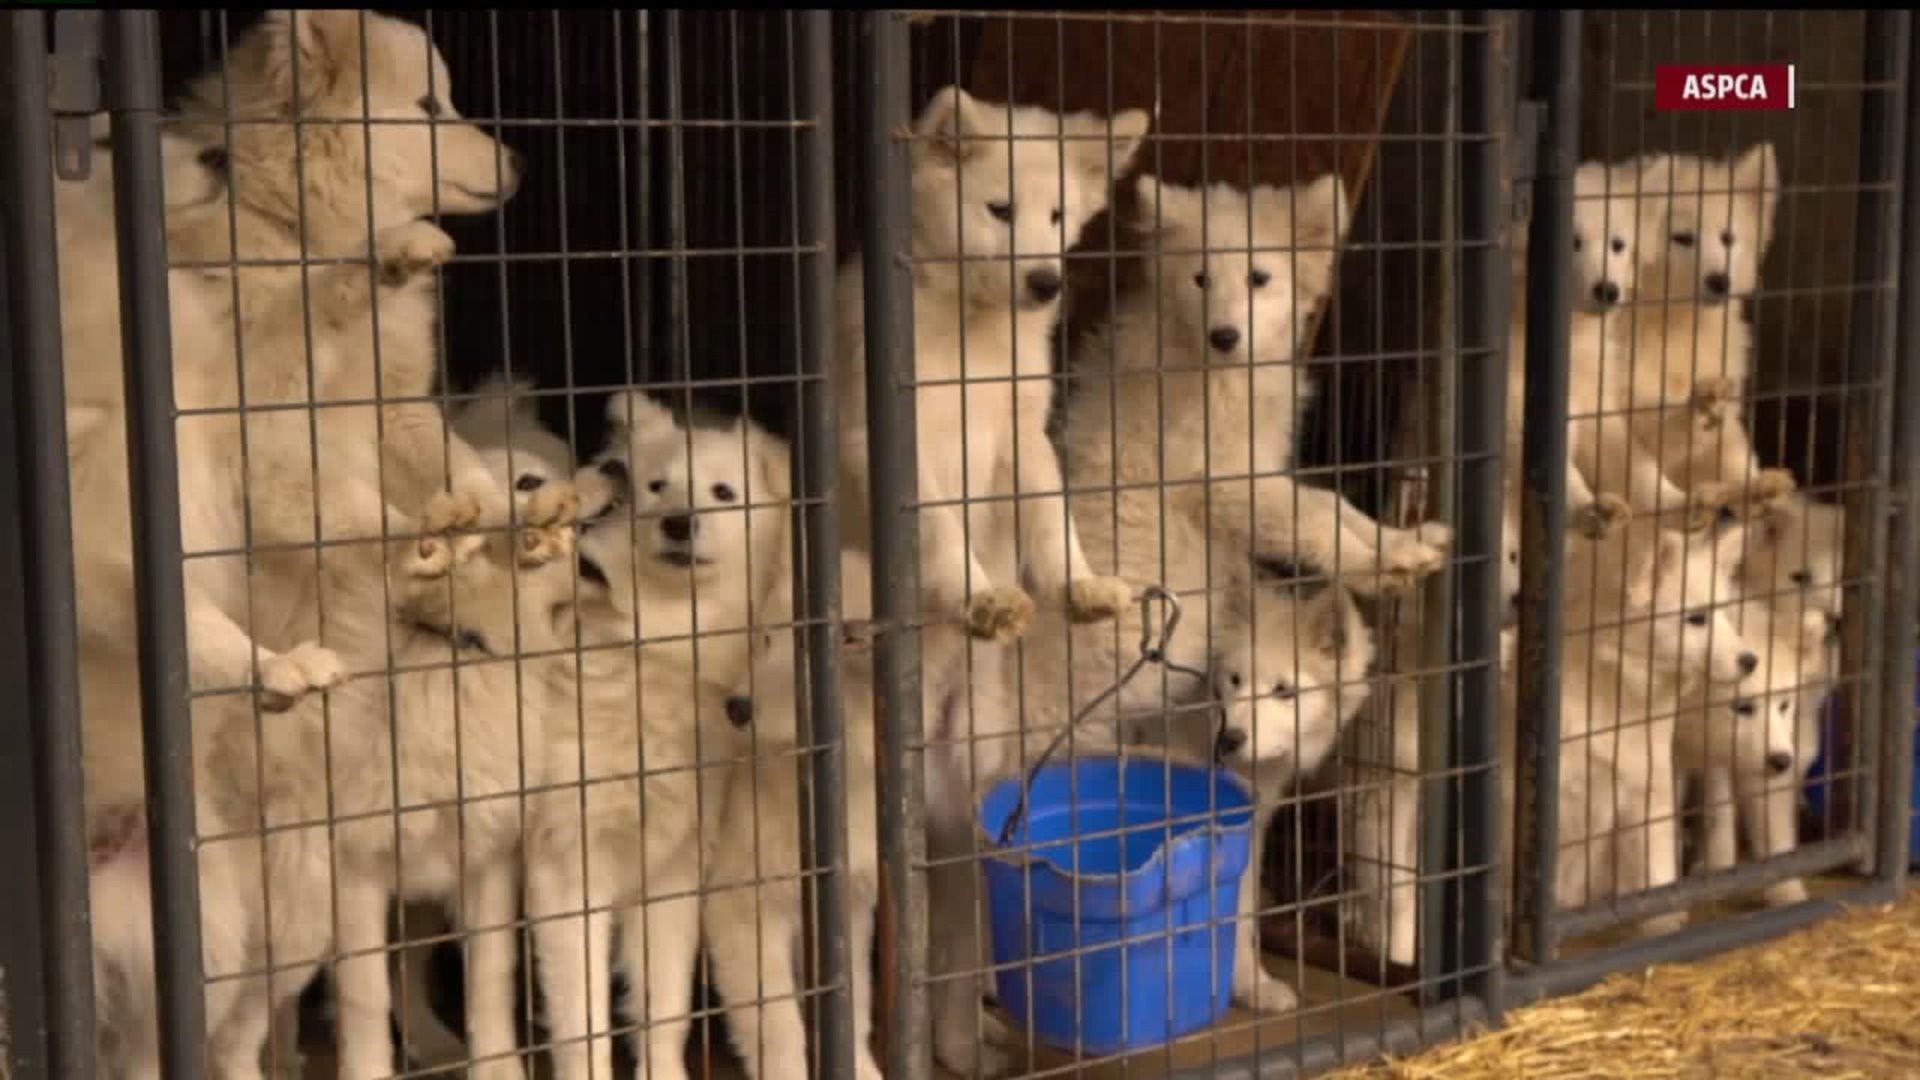 More released on conditions of alleged Iowa puppy mill